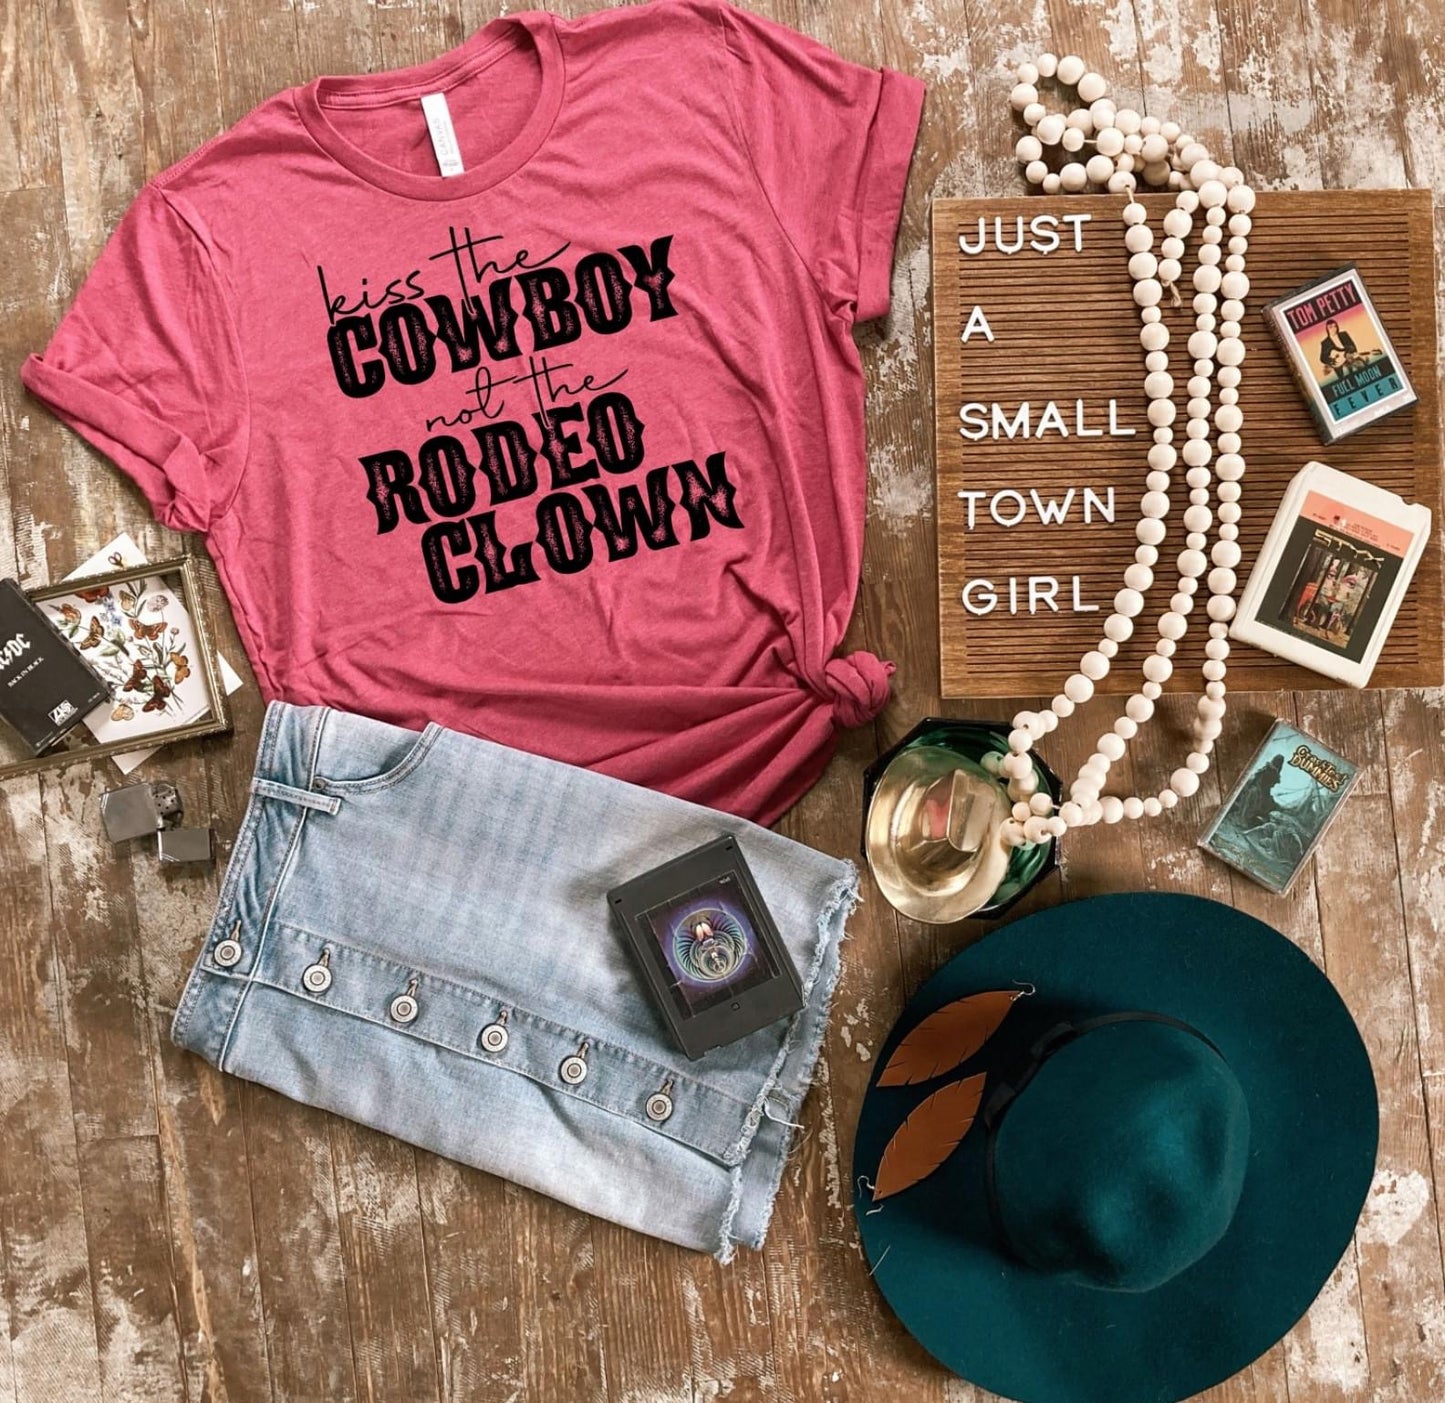 PREORDER - Kiss the Cowboy Not the Rodeo Clown Soft Boutique Tee